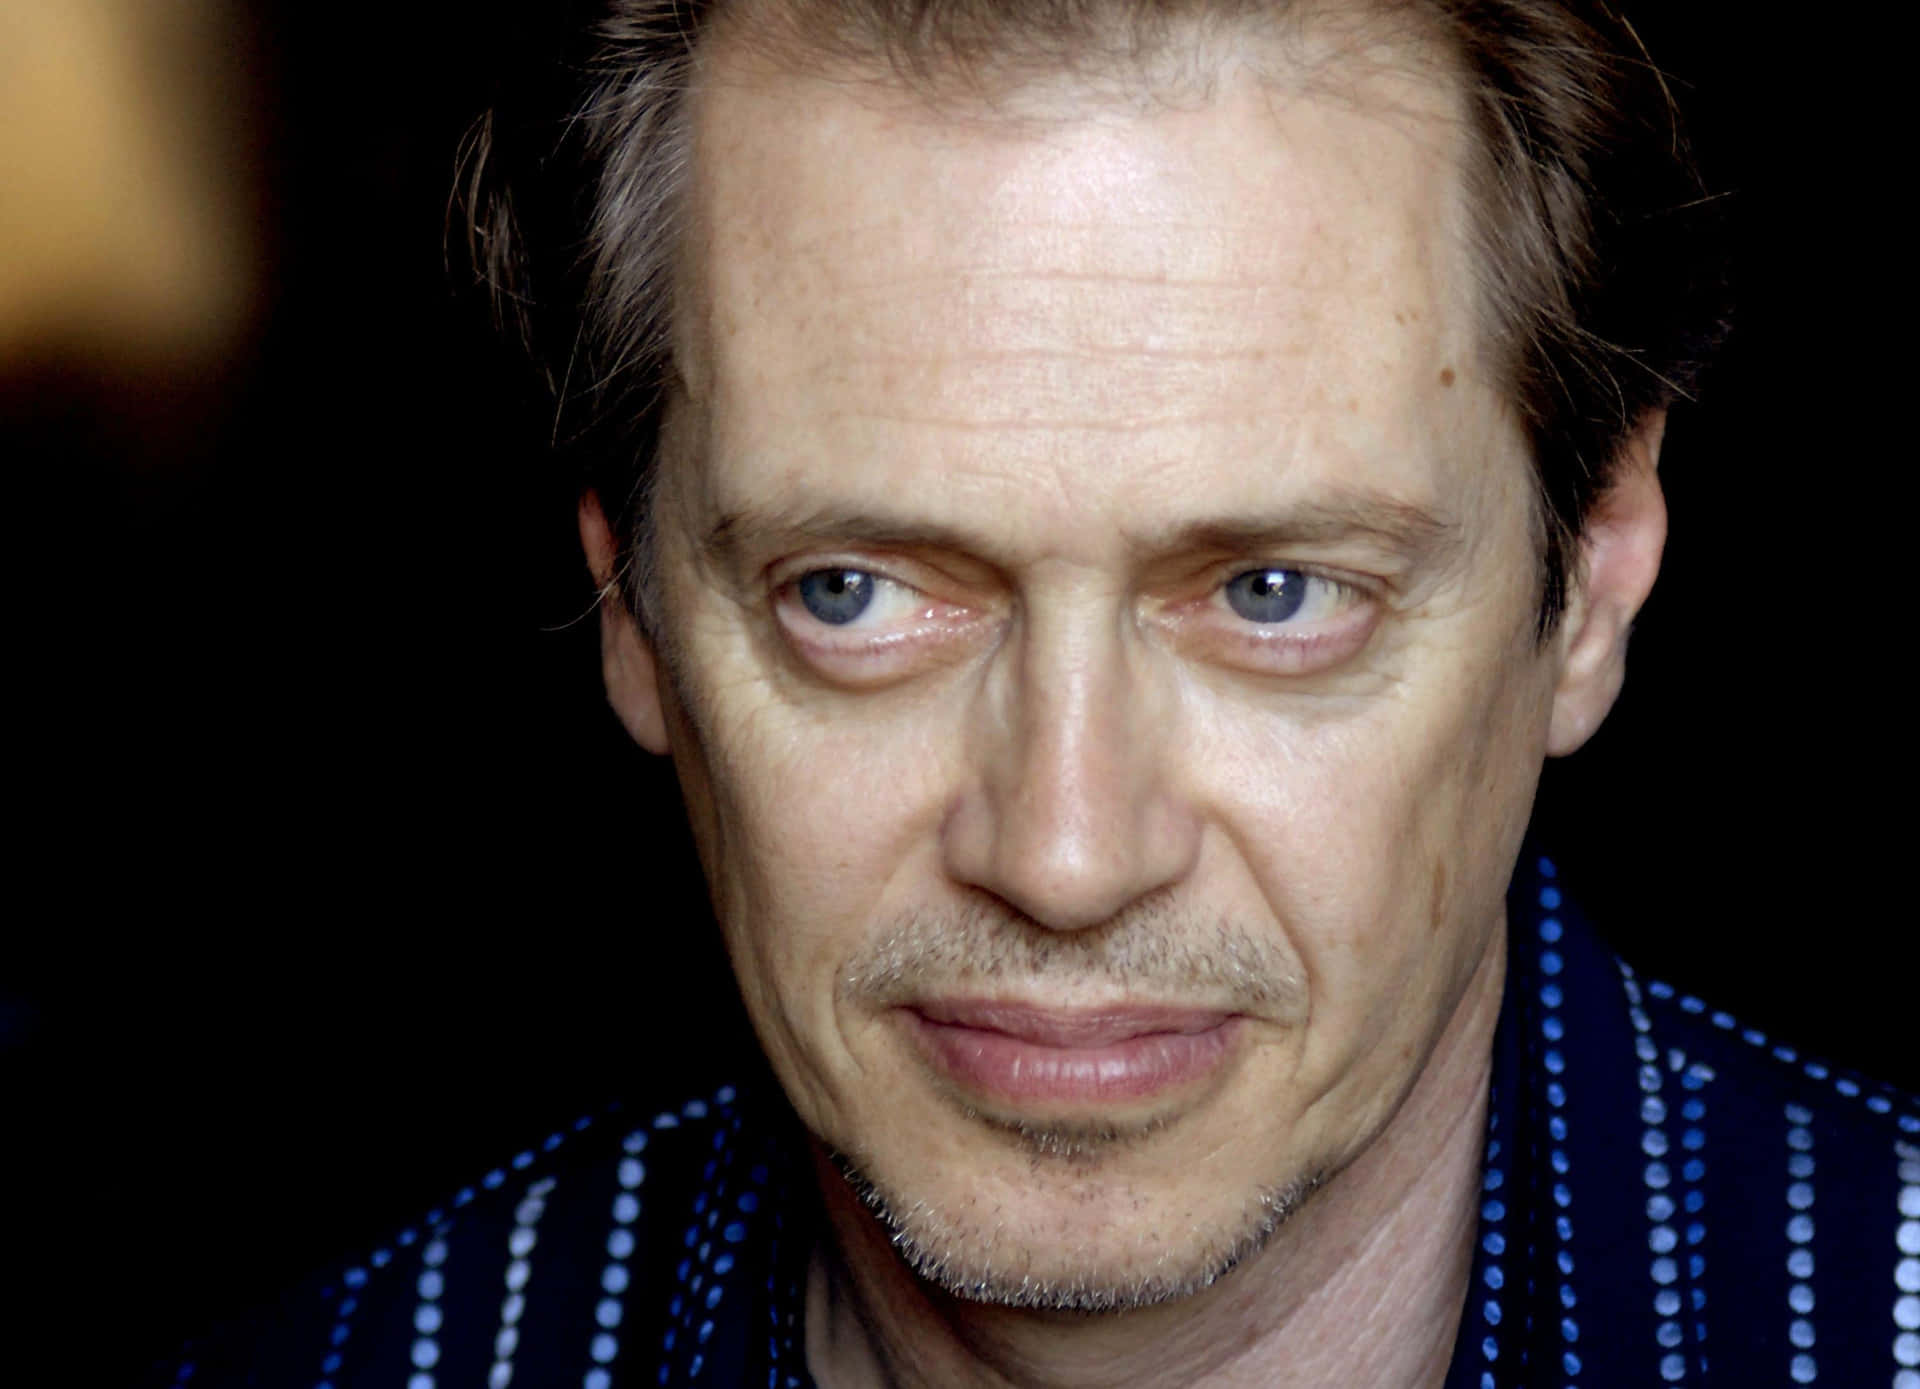 Hollywood Actor Steve Buscemi, In A Contemplative Moment.